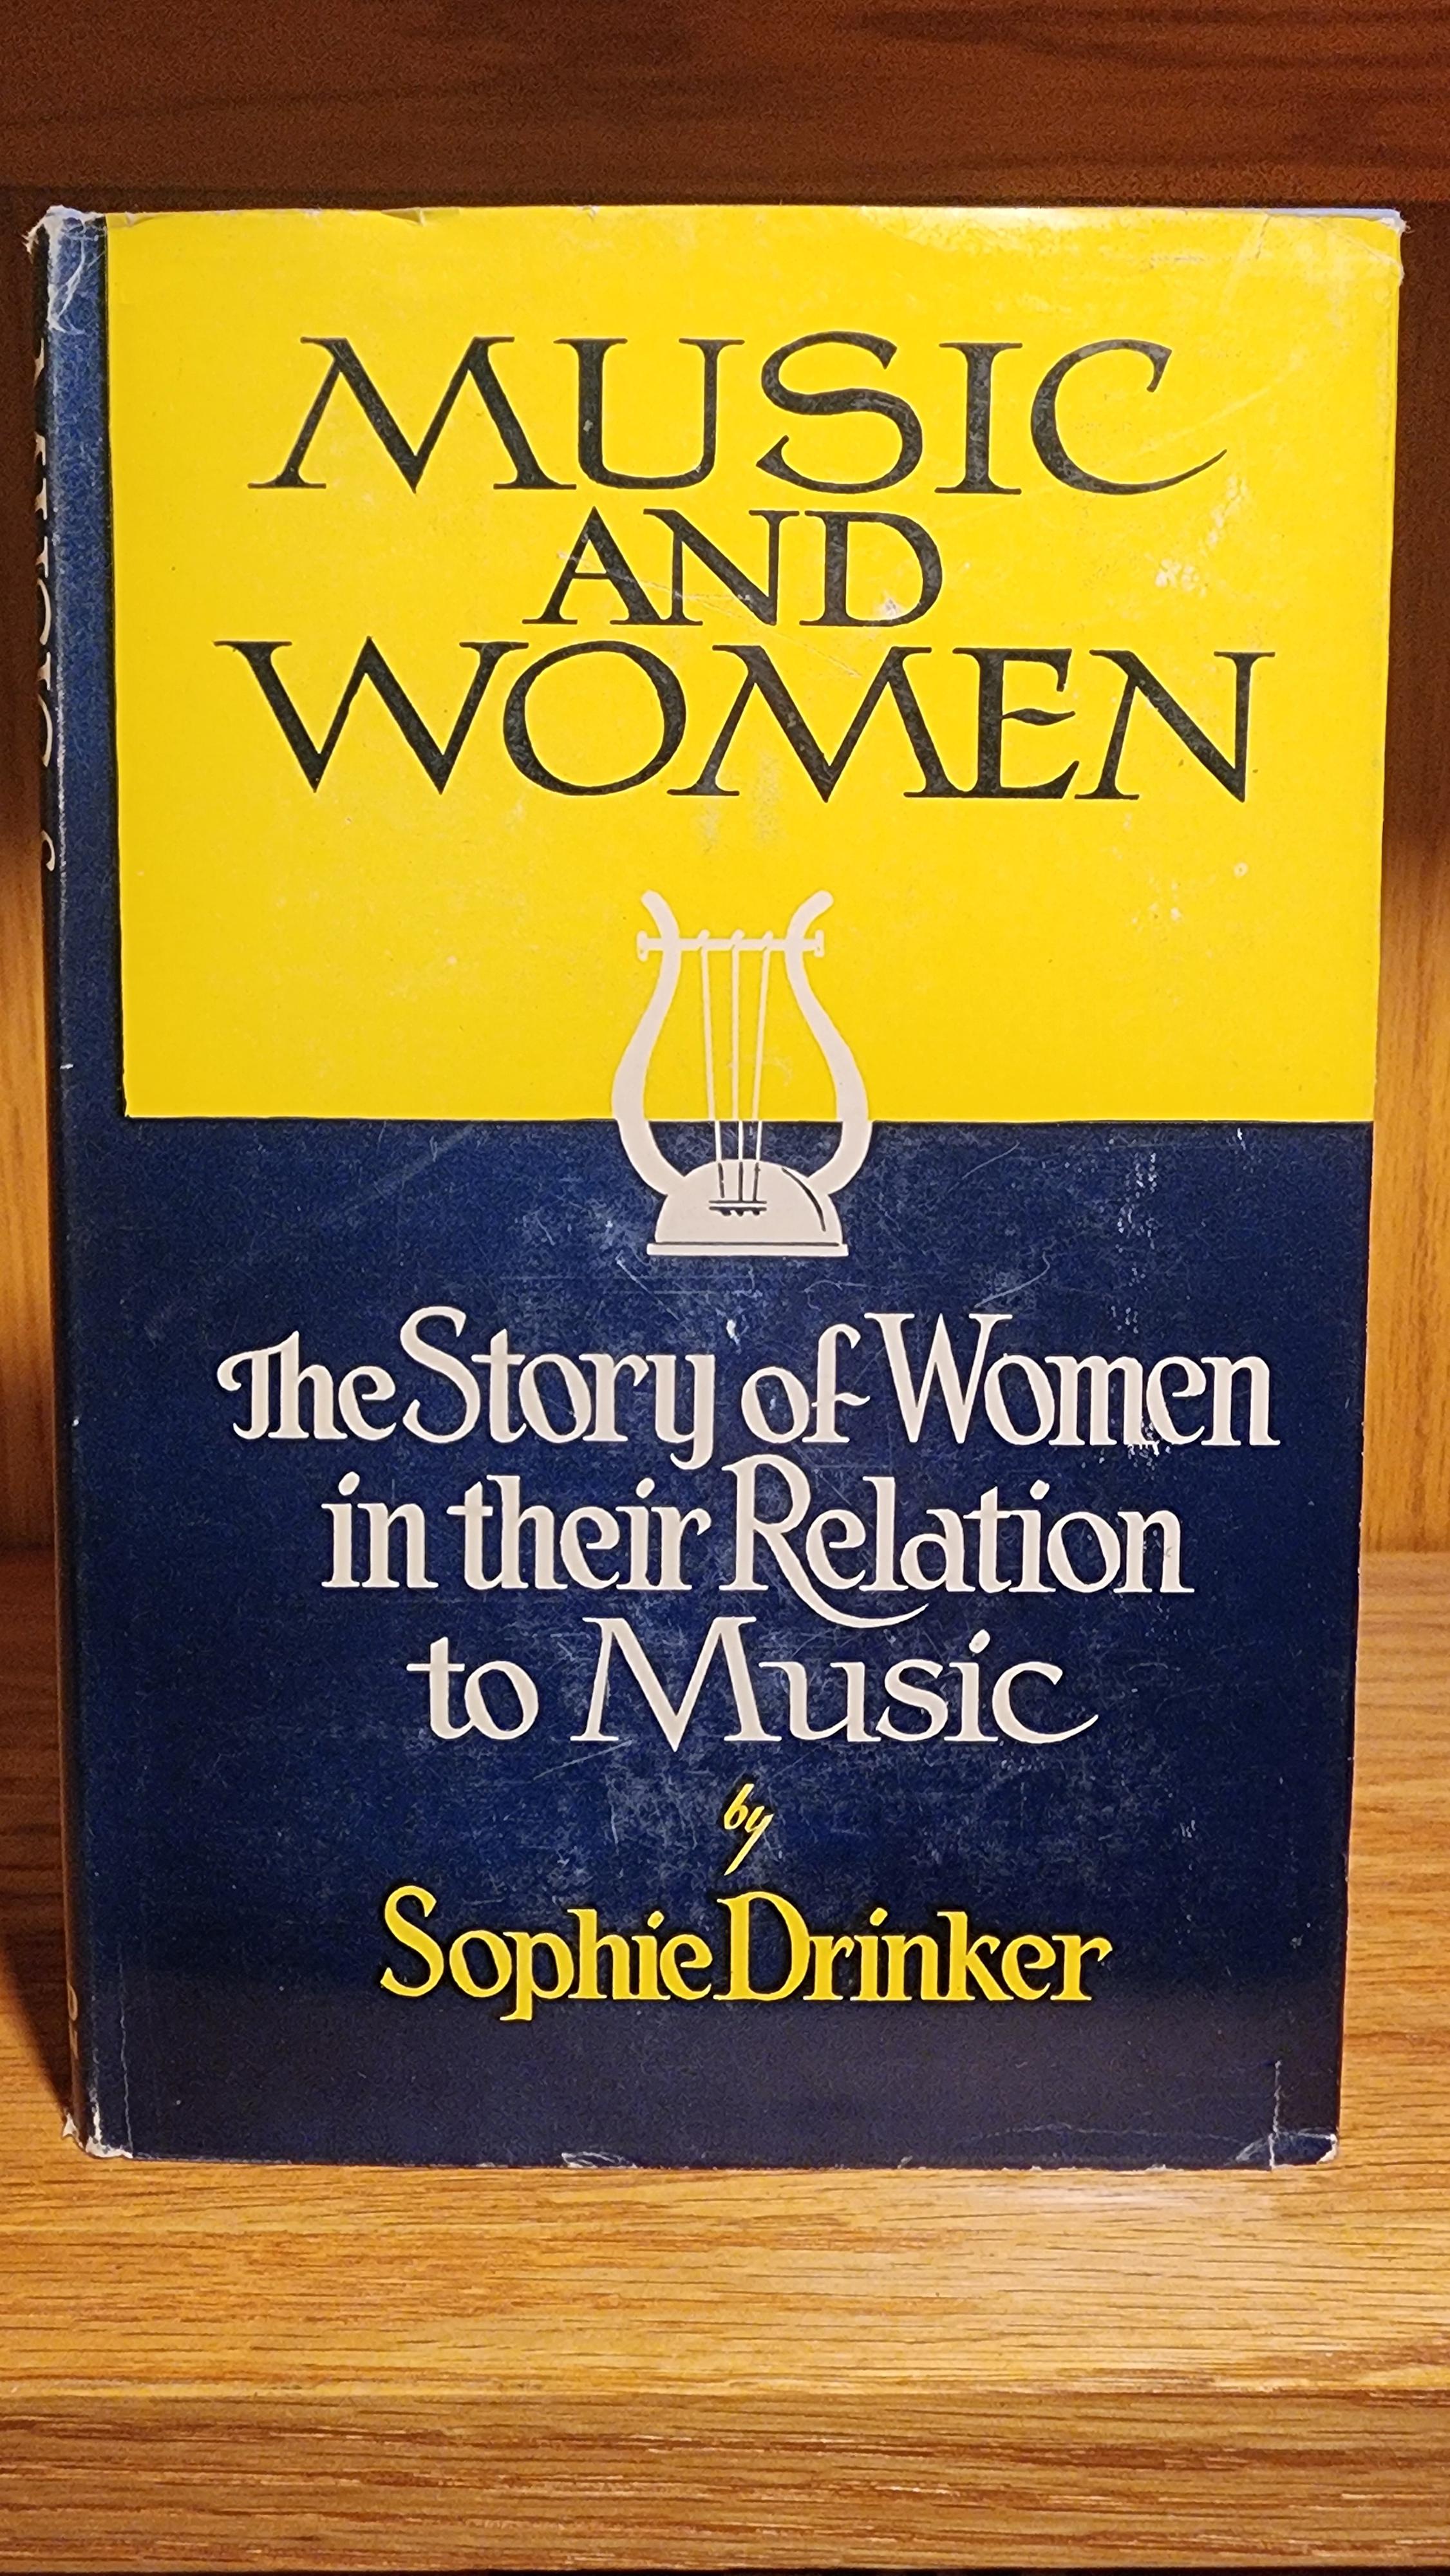 Music and Women: The story of women in their relation to music - Hardcover, by Sophie Drinker, 1948. Coward-McCann